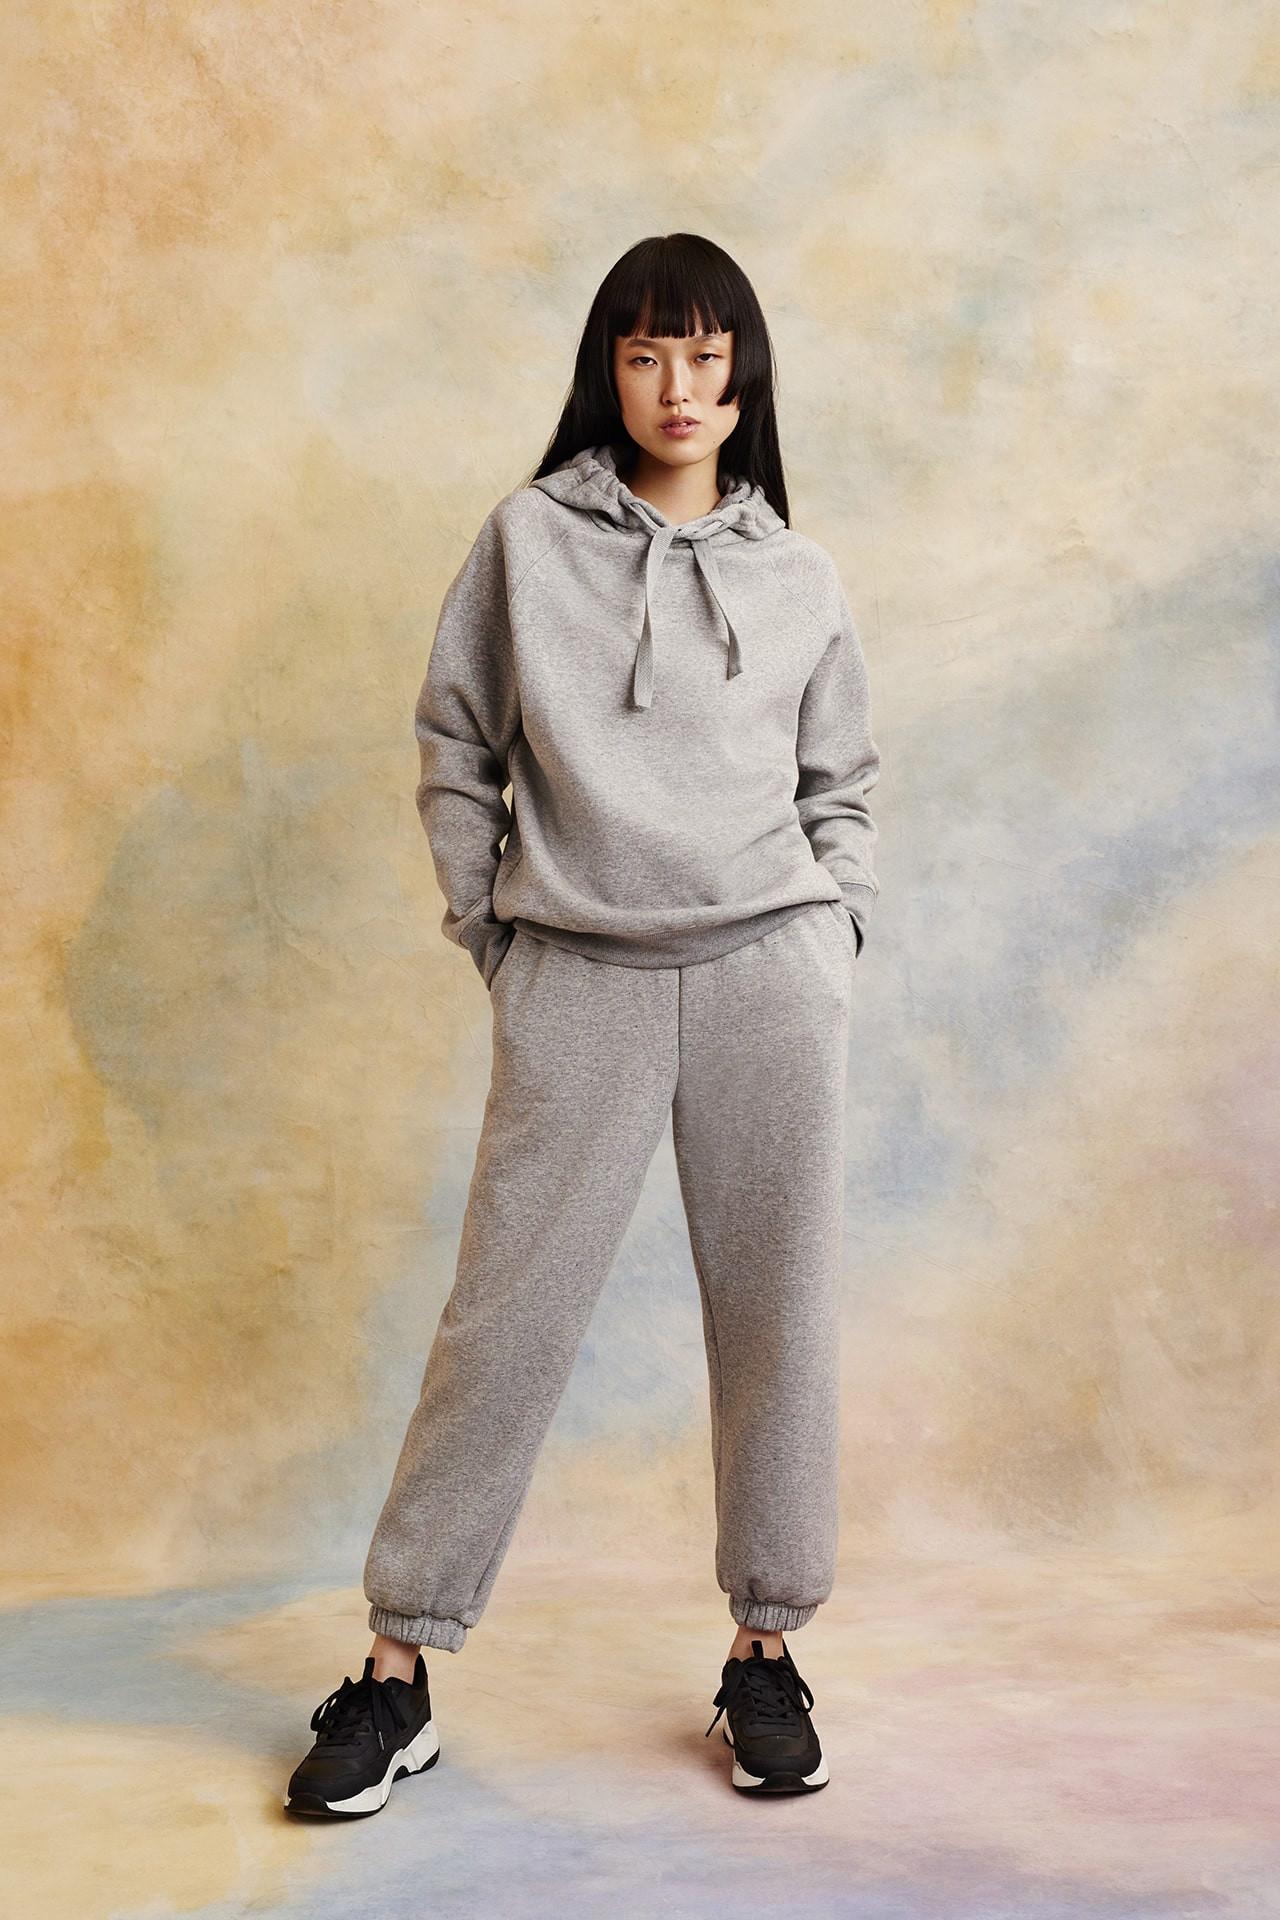 Primark launches new sustainable women’s leisurewear collection with recycled cotton innovator Recover